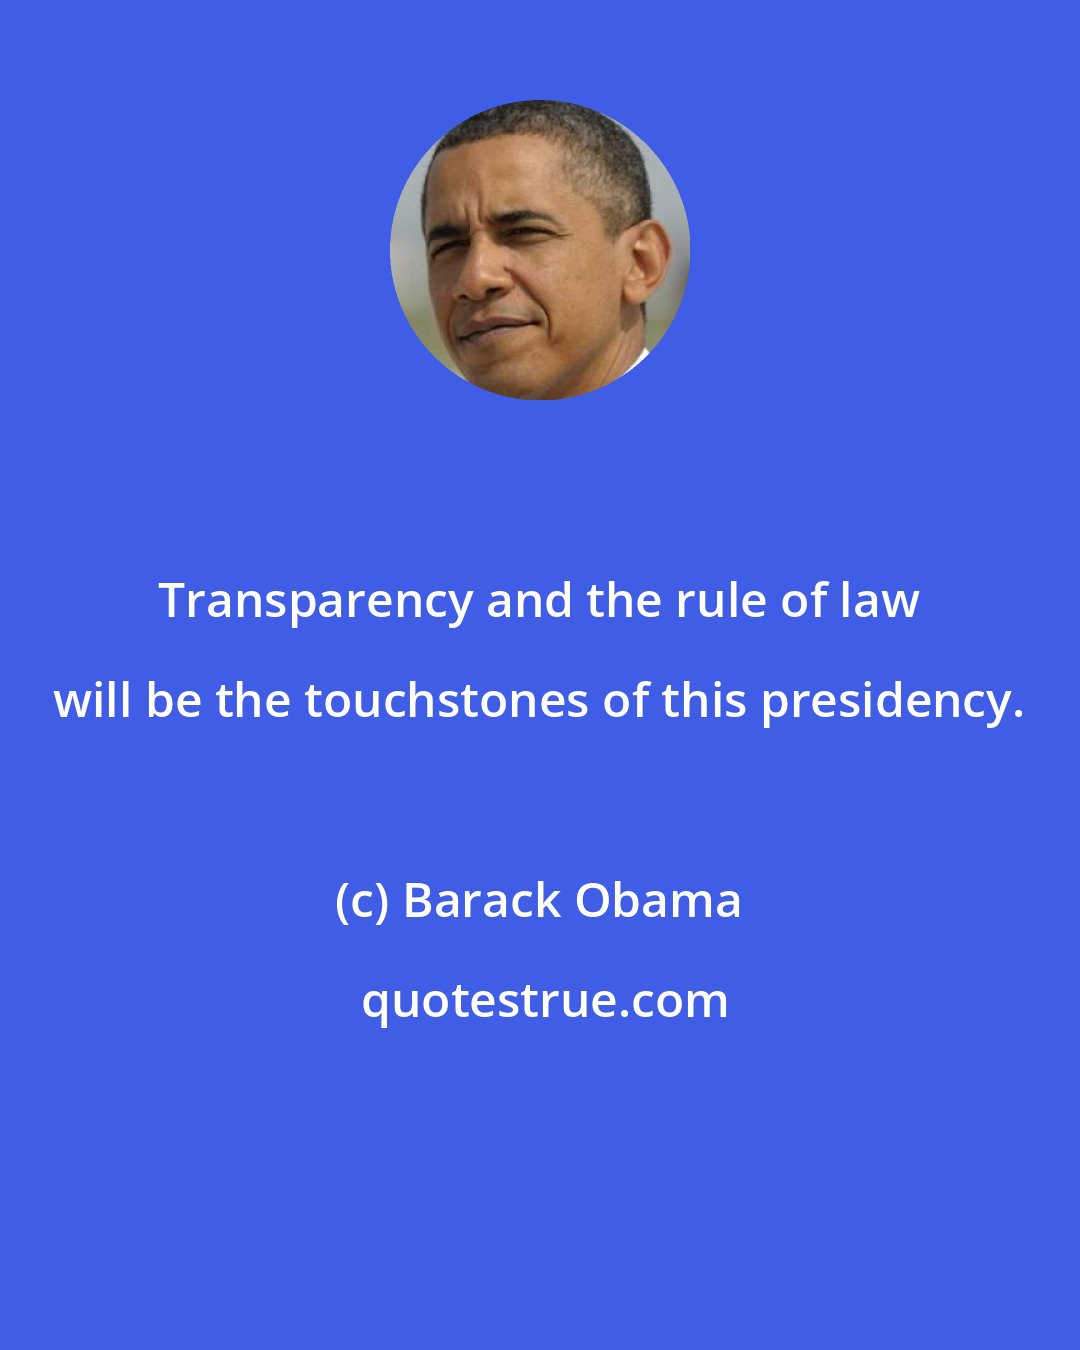 Barack Obama: Transparency and the rule of law will be the touchstones of this presidency.